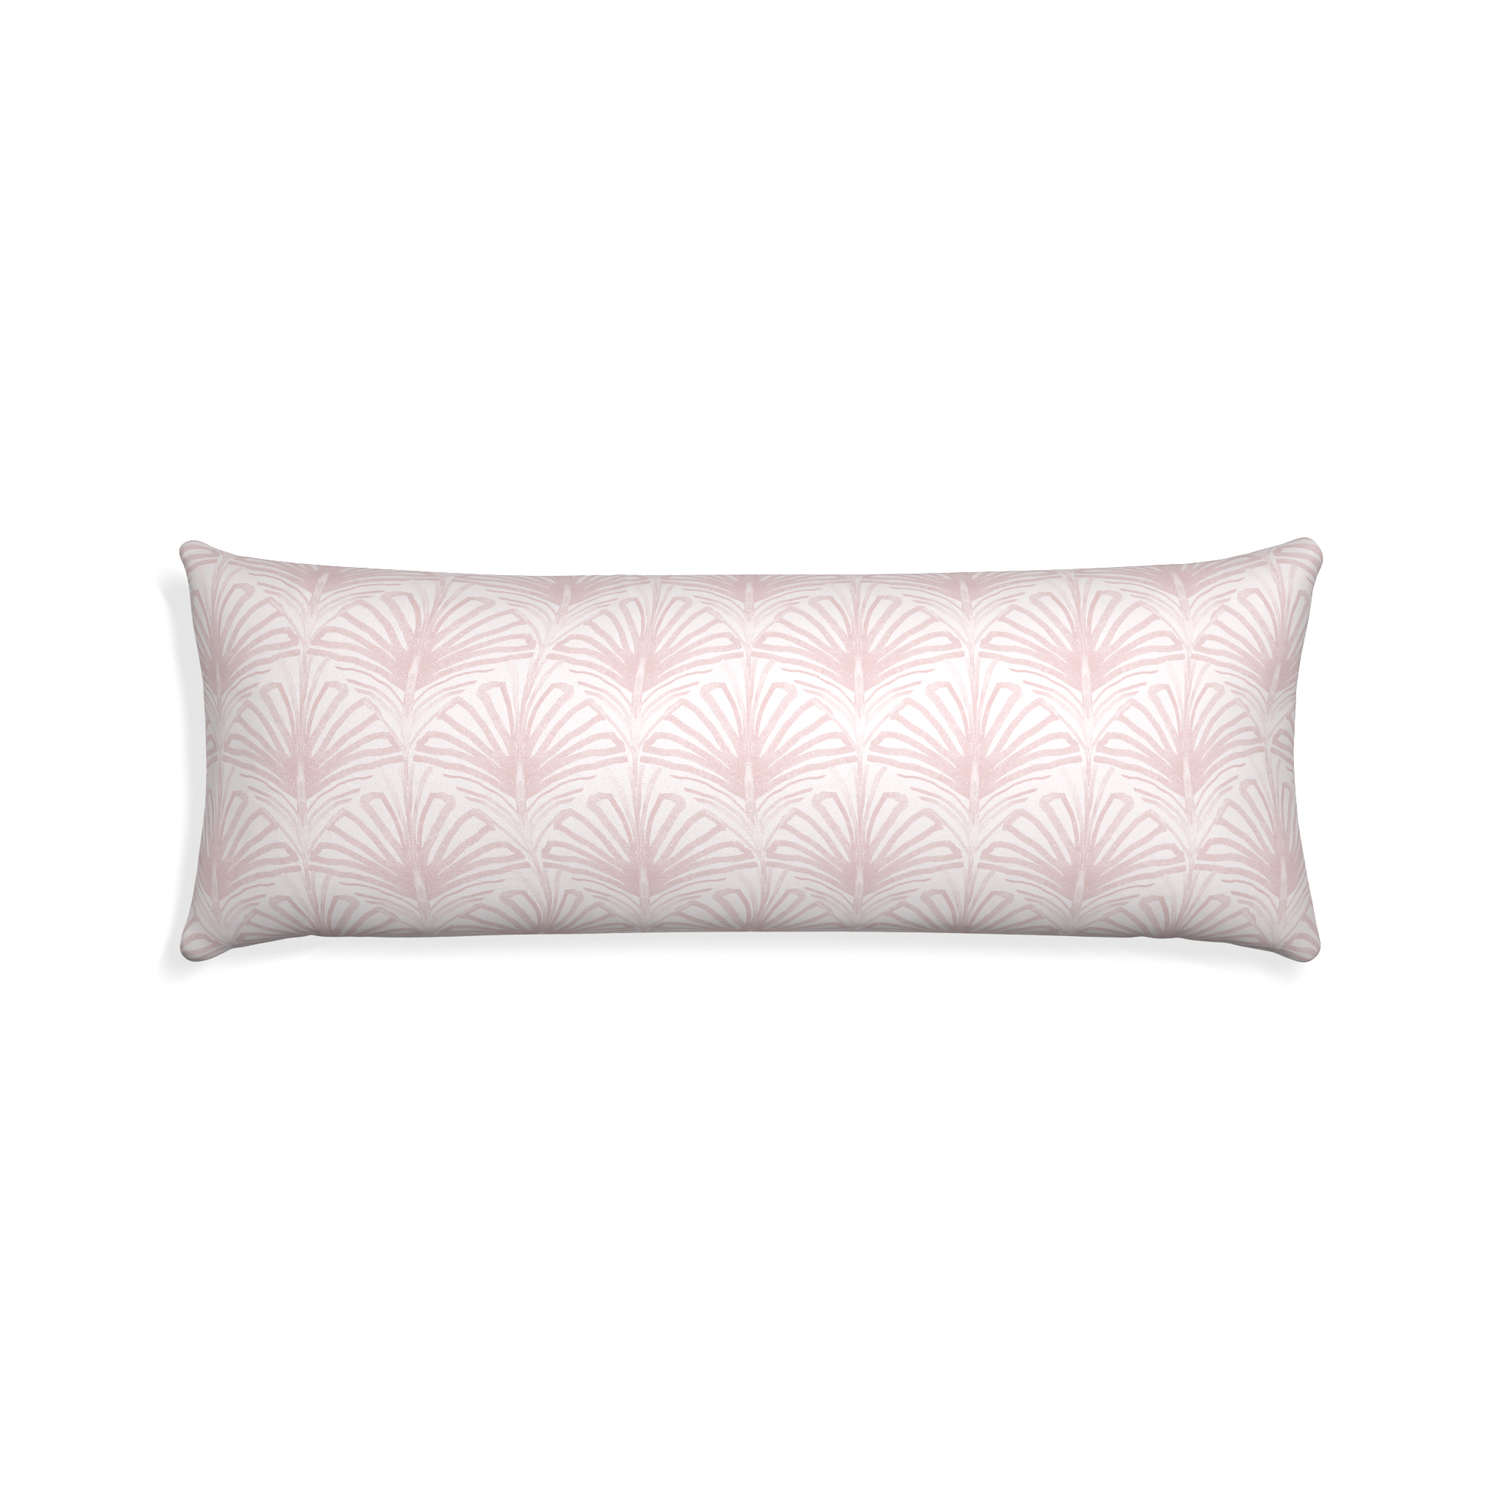 Xl-lumbar suzy rose custom pillow with none on white background